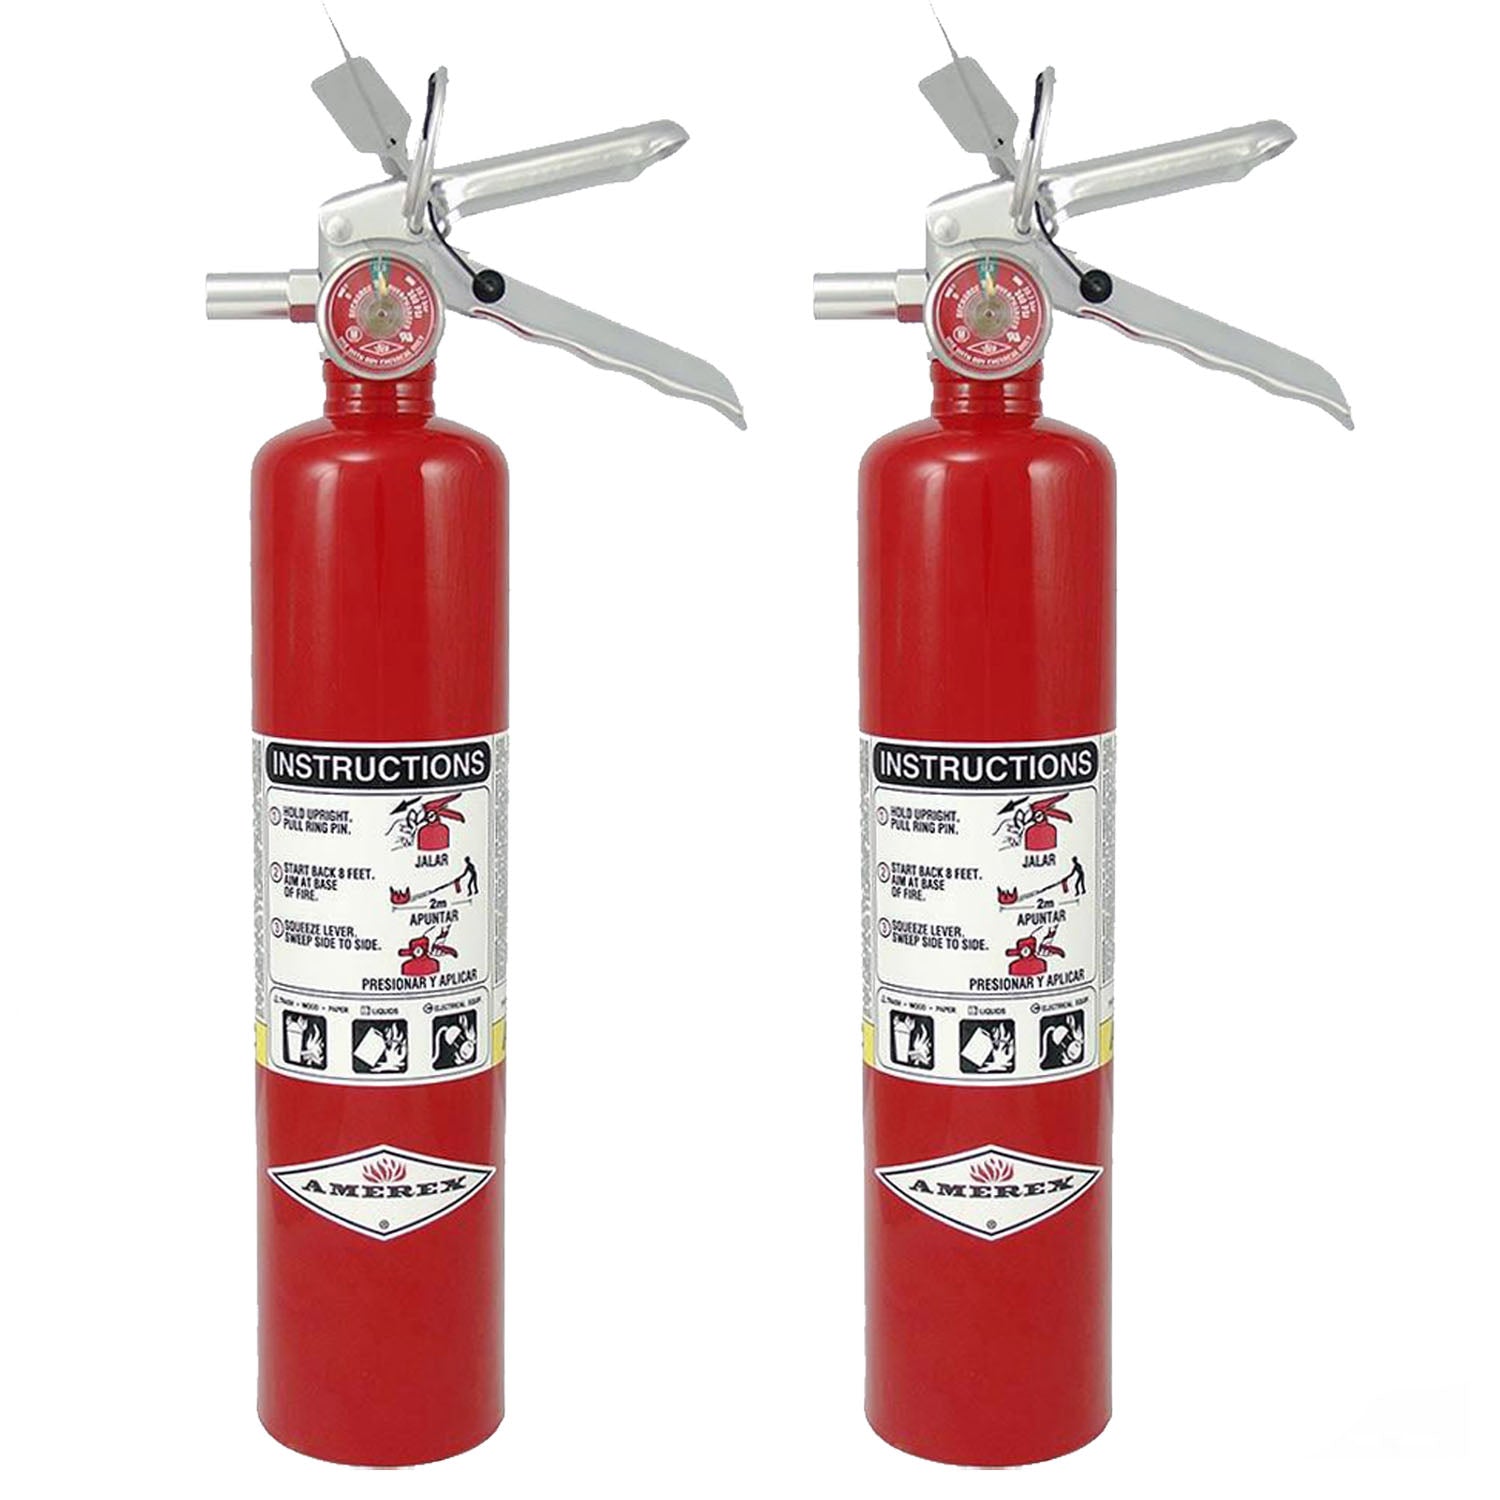 Amerex Dry Chemical Fire Extinguisher - B417T - 2.5 Pounds - 2 Pack - Pro-Distributing